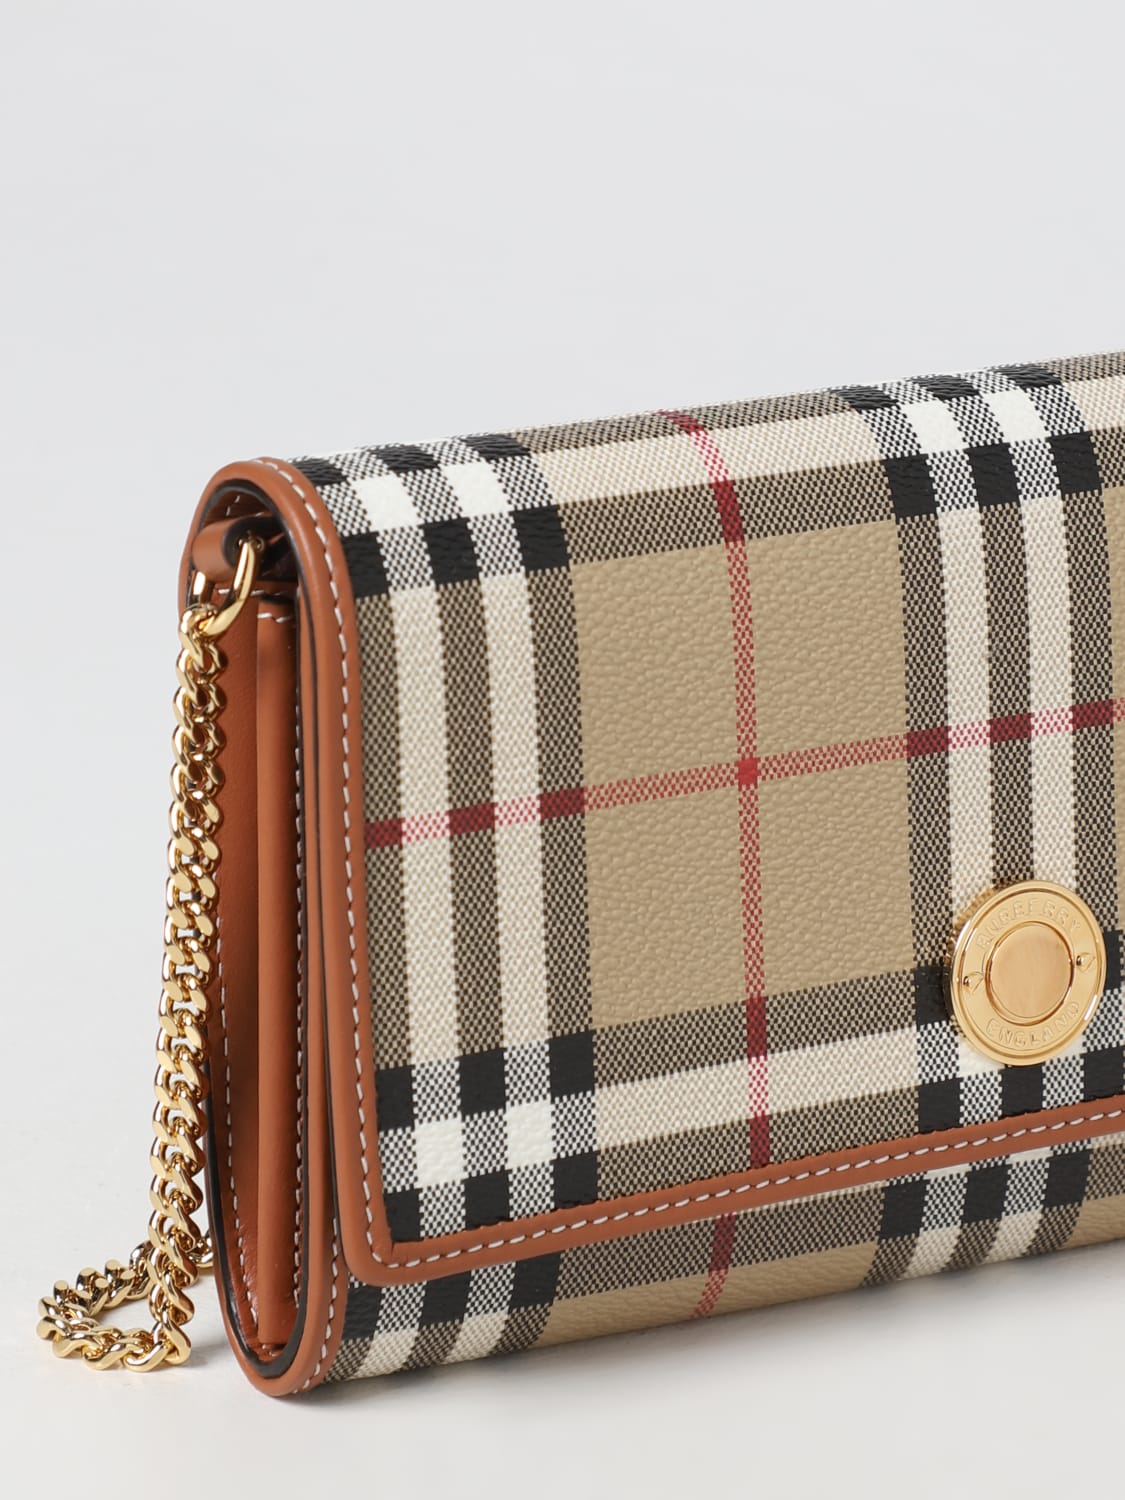 Burberry Checked wallet, Women's Accessories